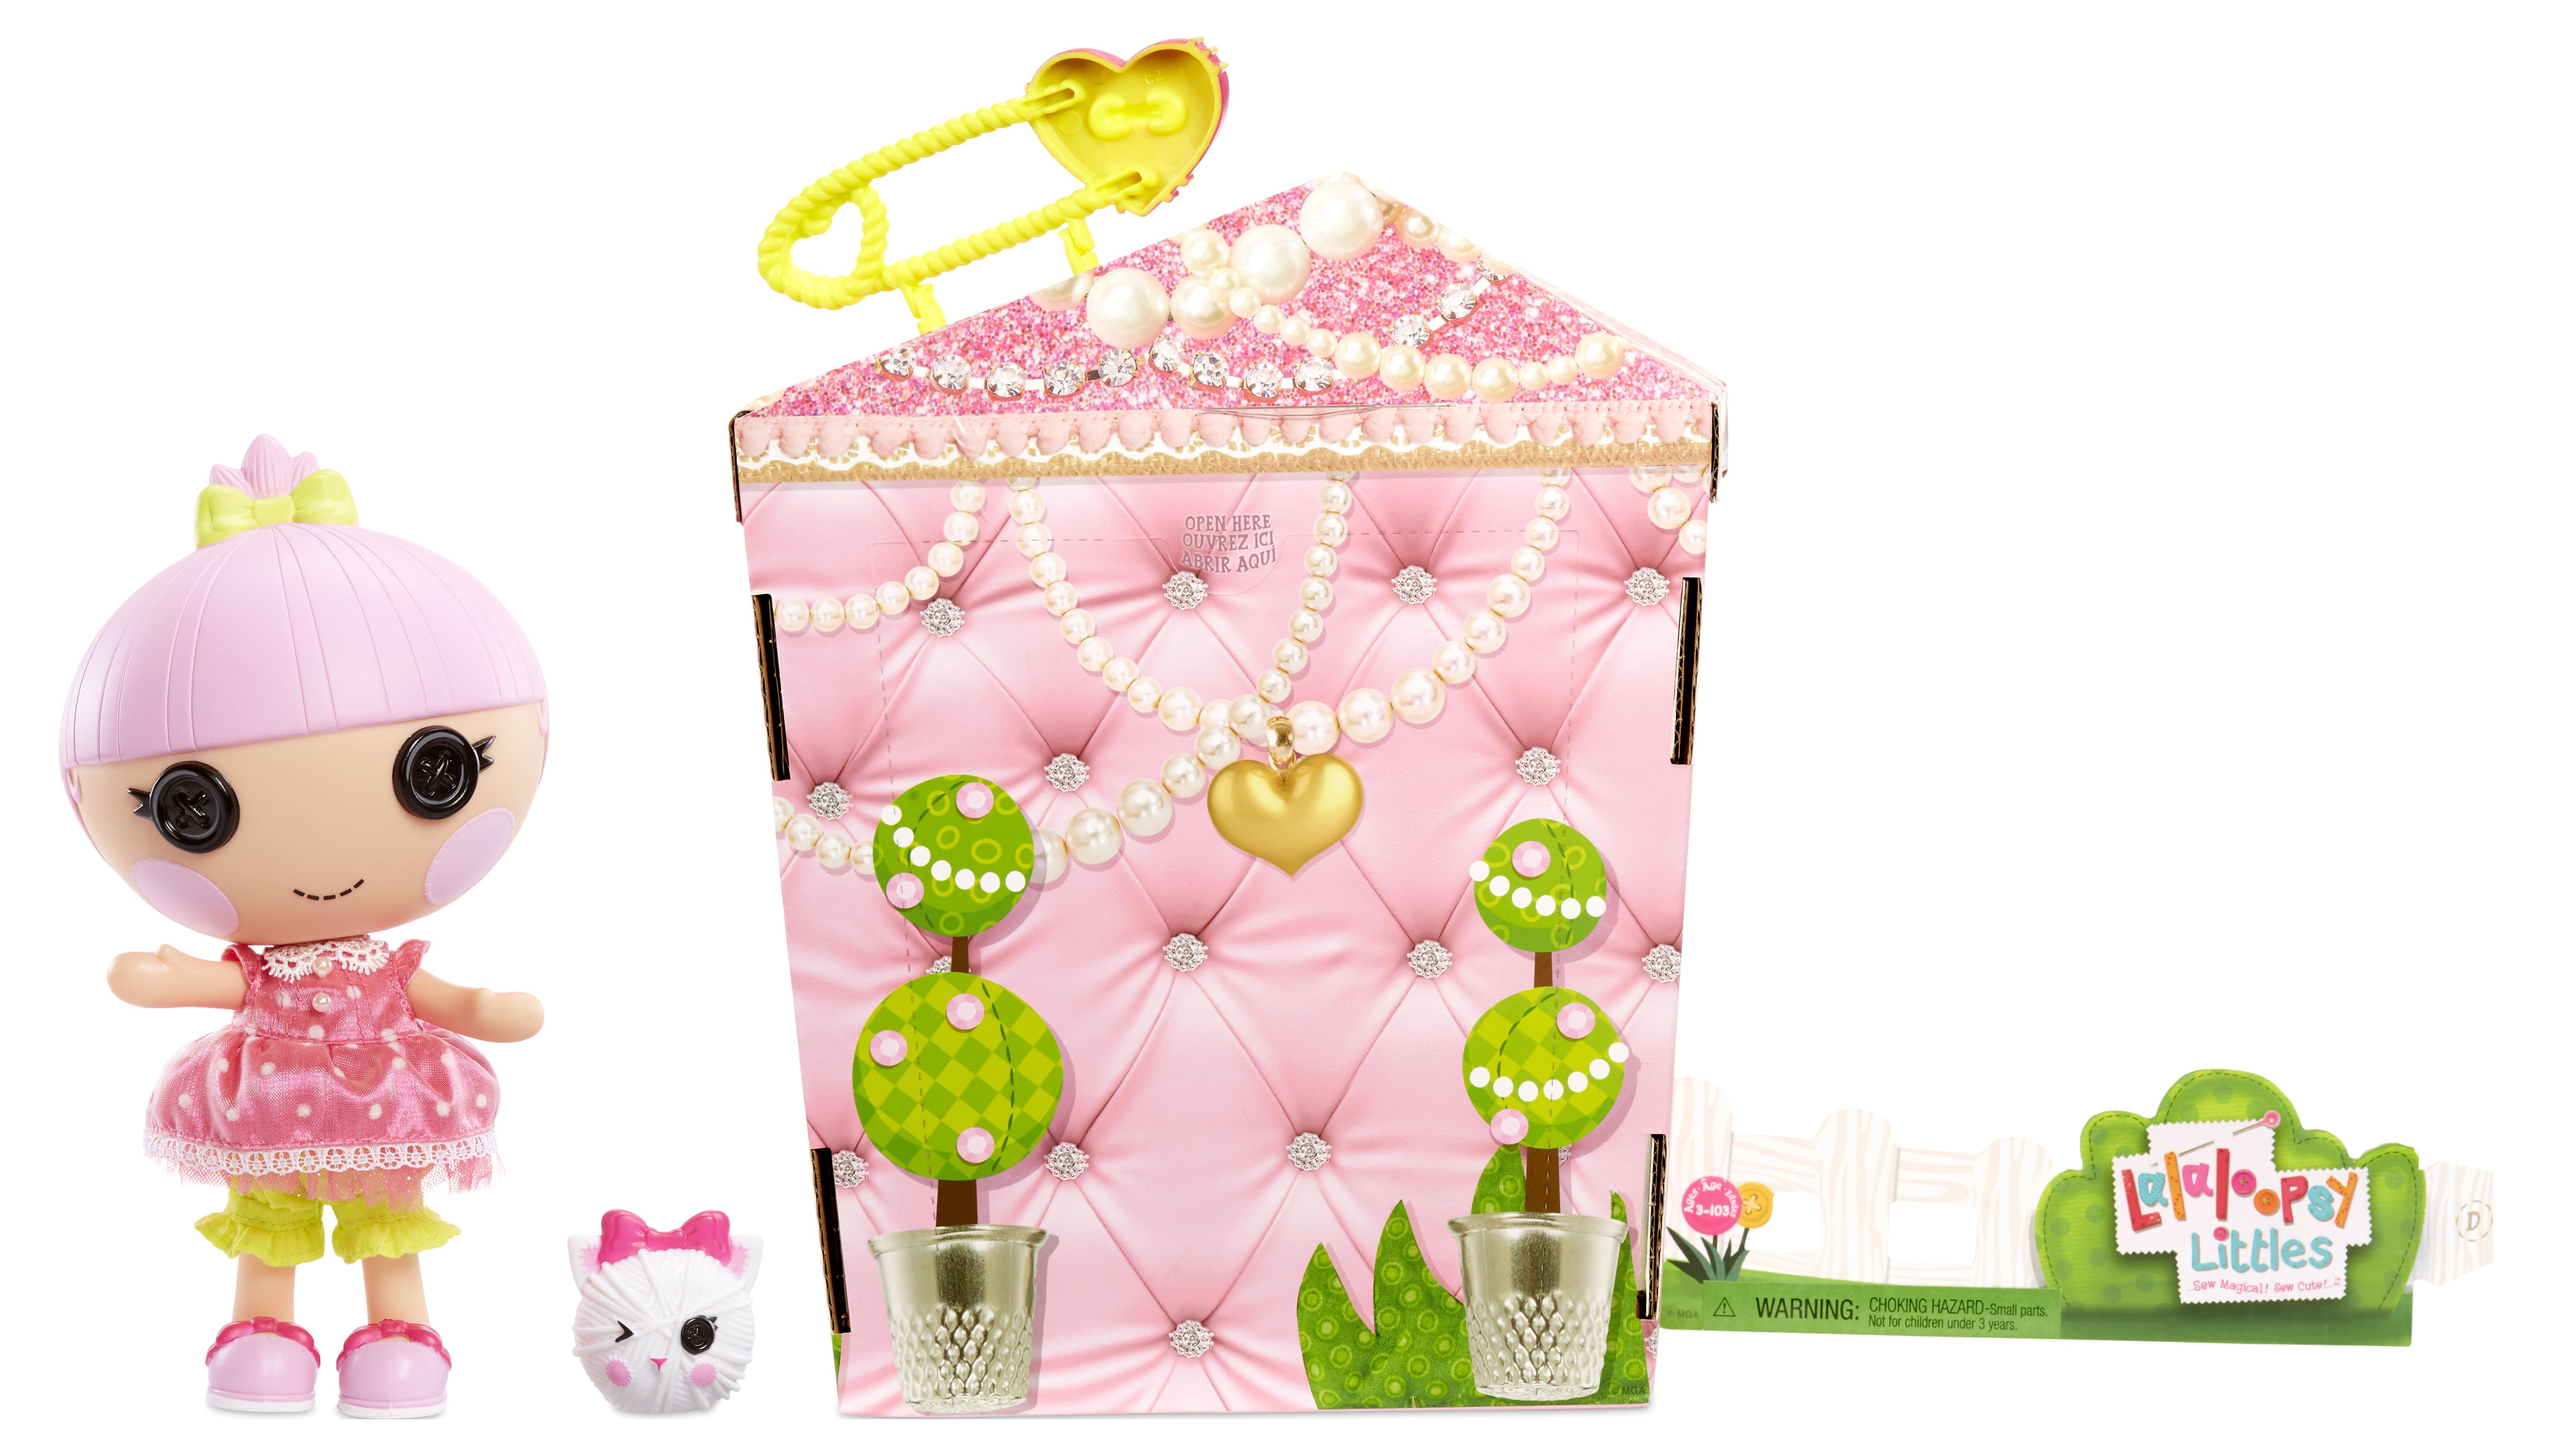 Lalaloopsy Littles Doll Trinket Sparkles and Pet Kitten Playset, 7" Princess Doll With Changeable Pink Outfit and Shoes in Reusable Play House Package, Toys for Girls Ages 3 4 5+ to 103 - image 3 of 5